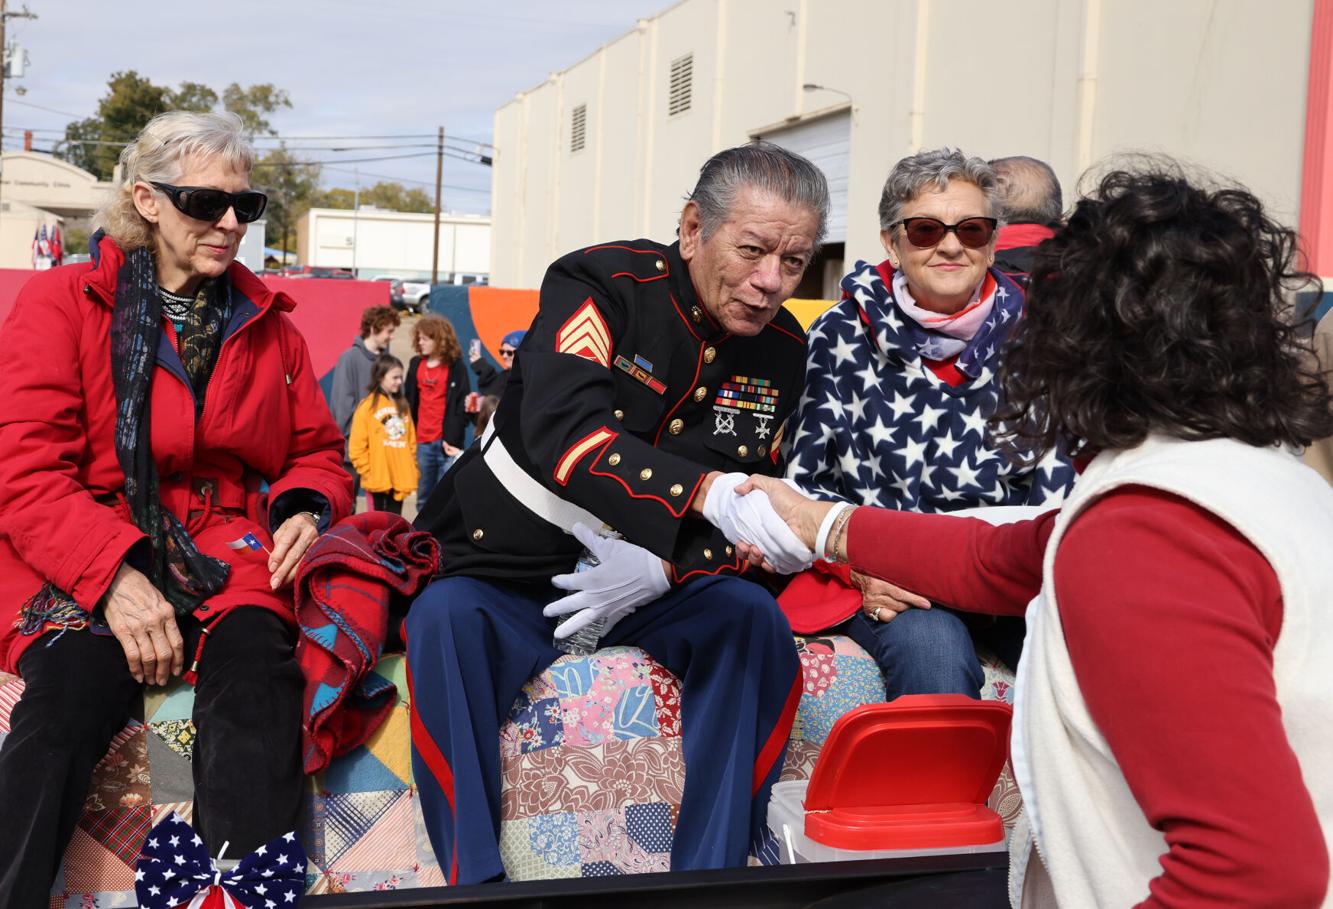 Waco Veterans Day Parade in fine form for group's 100th anniversary